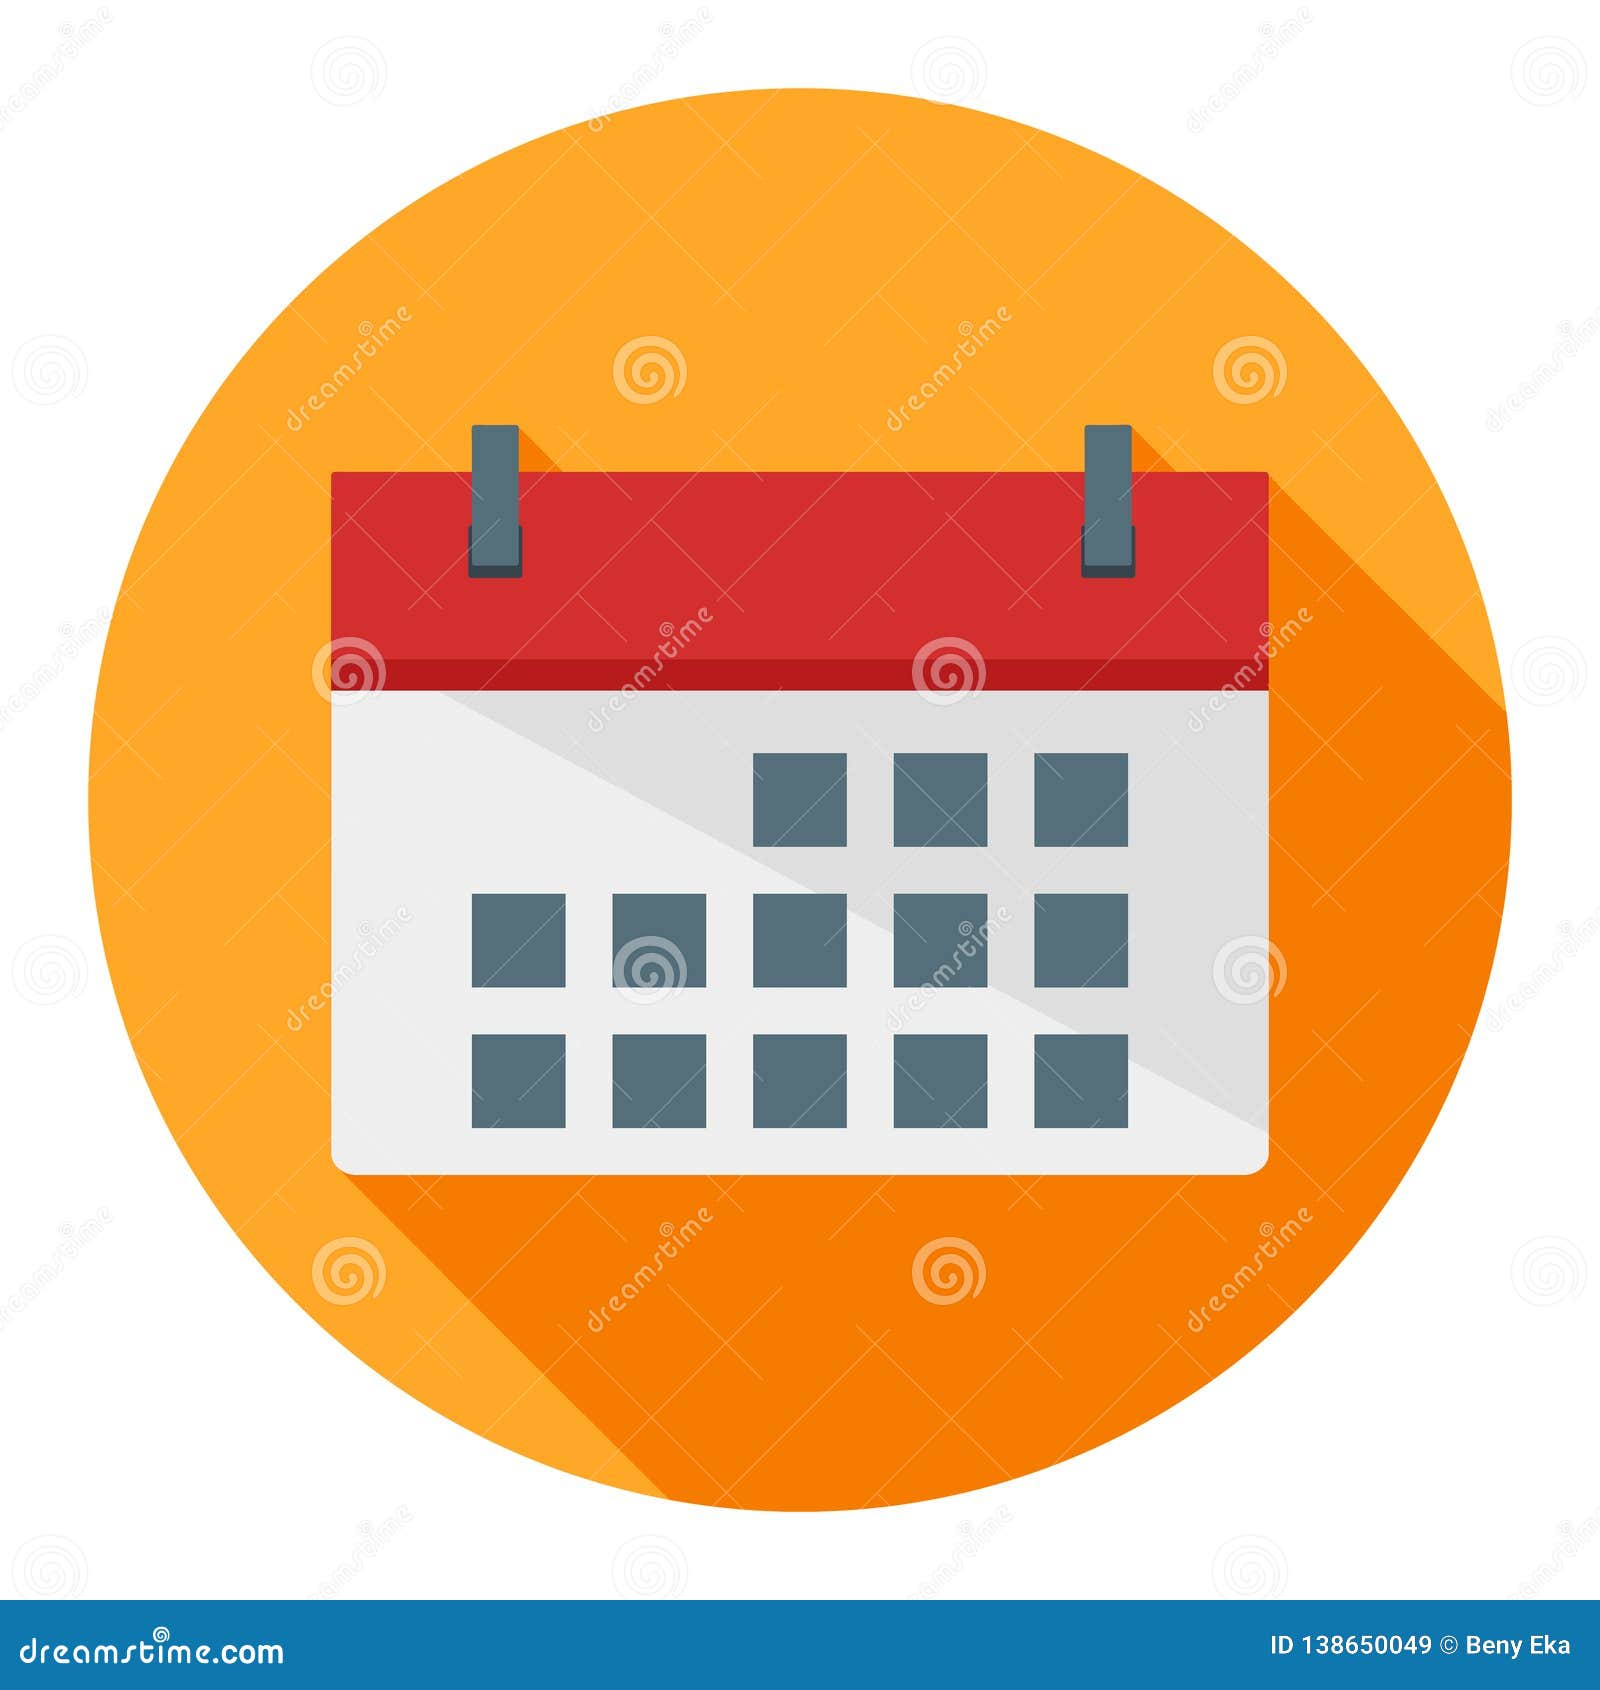 Calendar Business Flat Icon Date Event Stock Vector Illustration Of Appointment Perfect